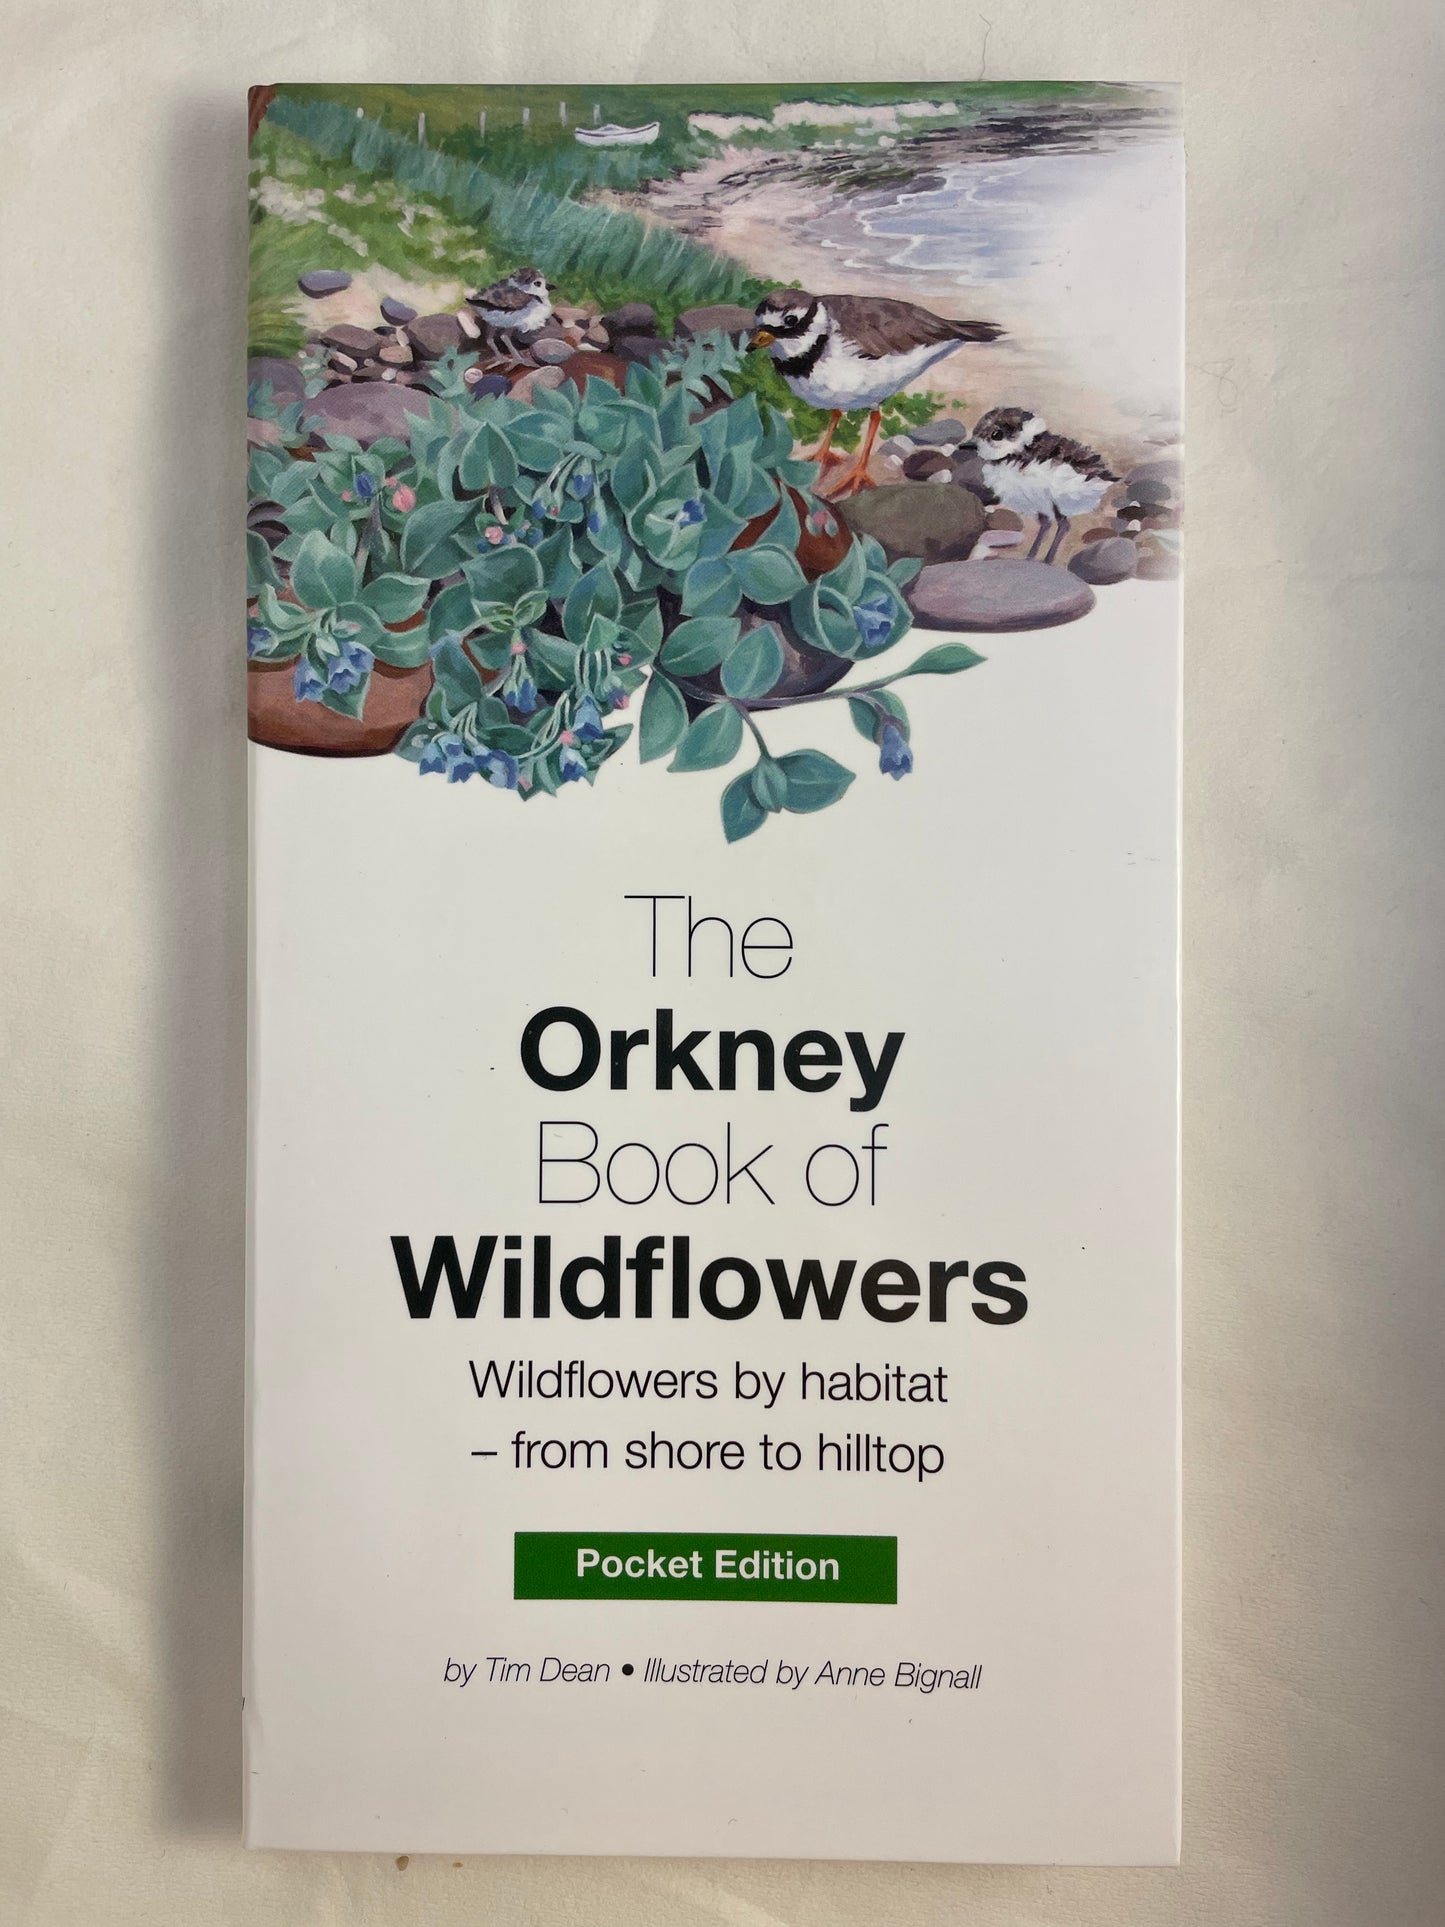 The Orkney Book of Wildflowers: Pocket Edition